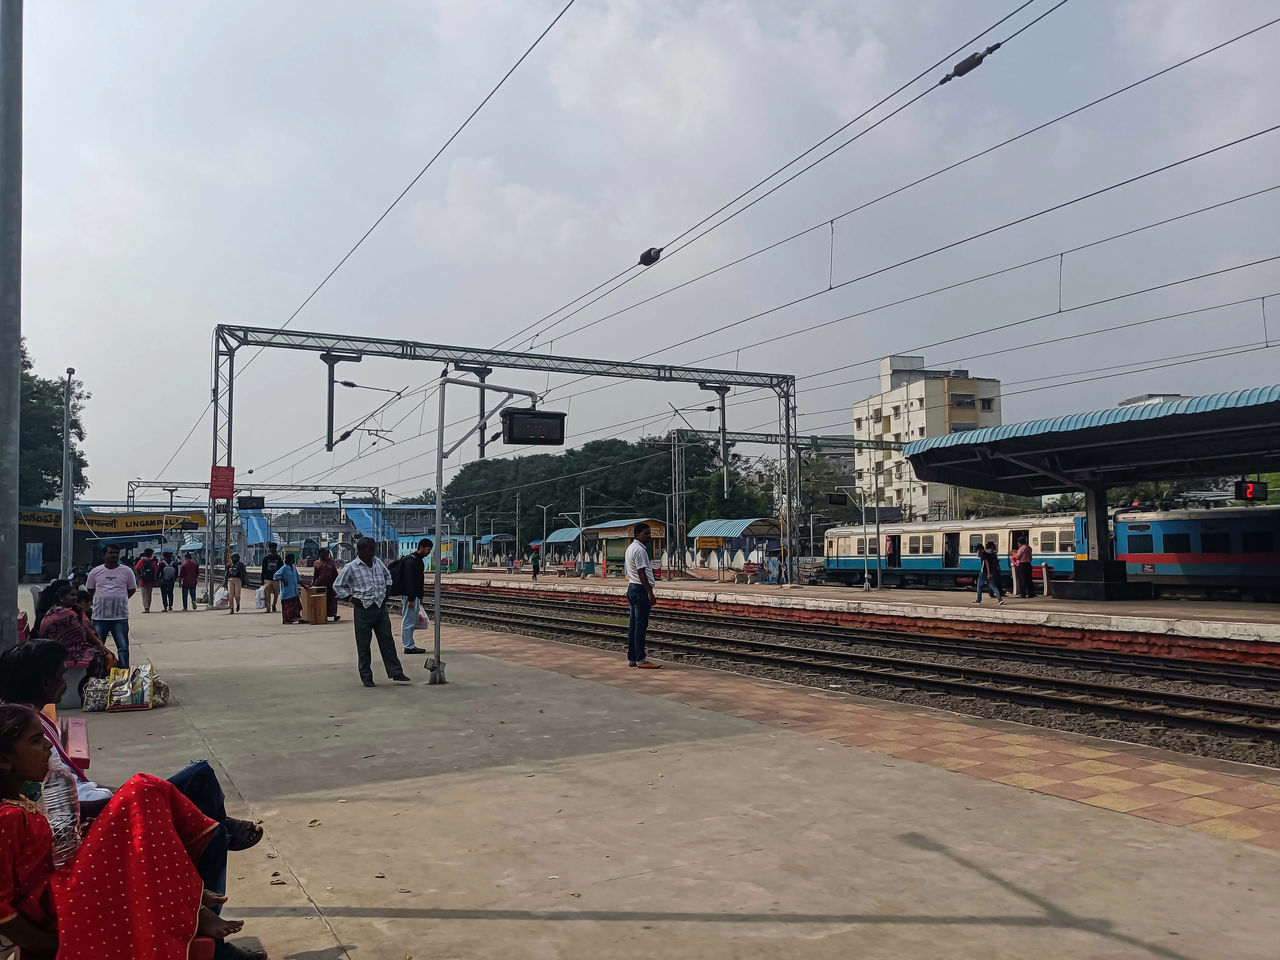 group of people, transport, architecture, sky, transportation, crowd, large group of people, rail transportation, city, mode of transportation, track, railroad track, built structure, nature, travel, cable, men, train, day, vehicle, electricity, train station, building exterior, railroad station, cloud, railroad station platform, outdoors, adult, public transportation, travel destinations, city life, lifestyles, women, power line